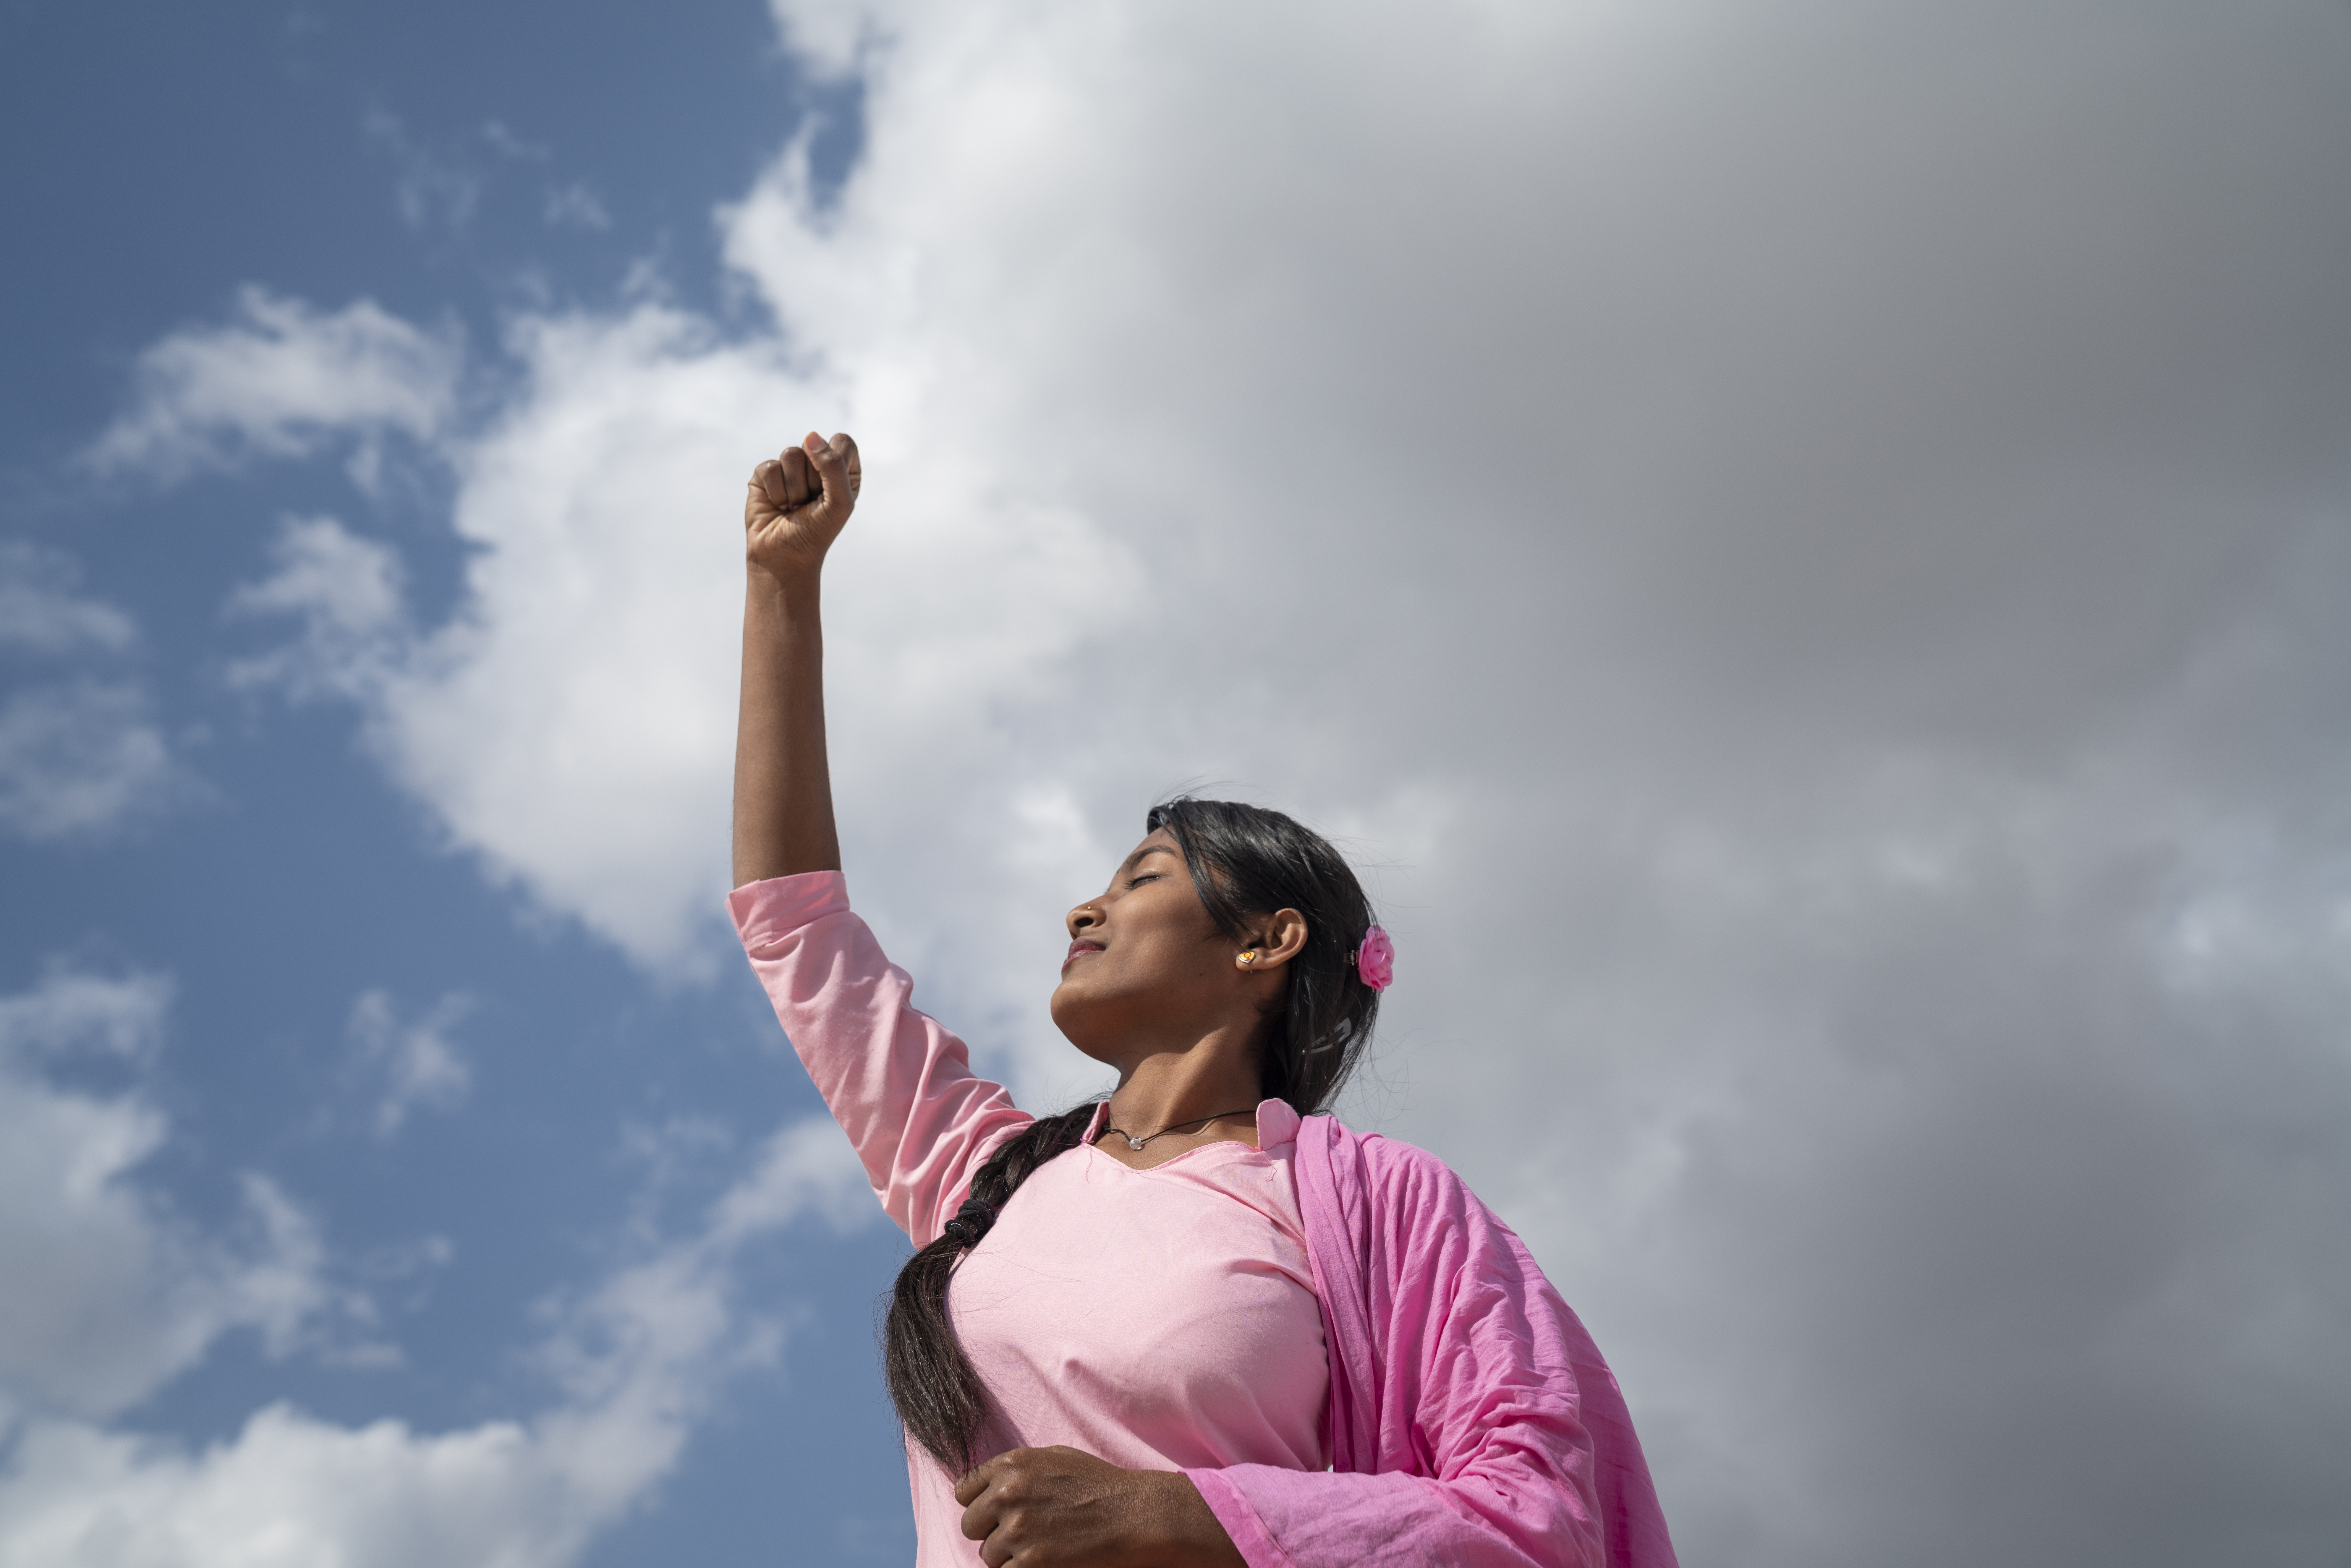 A young Indian woman in a pink outfit empowered with her right hand in a fist raised high in the air with the sky behind her.